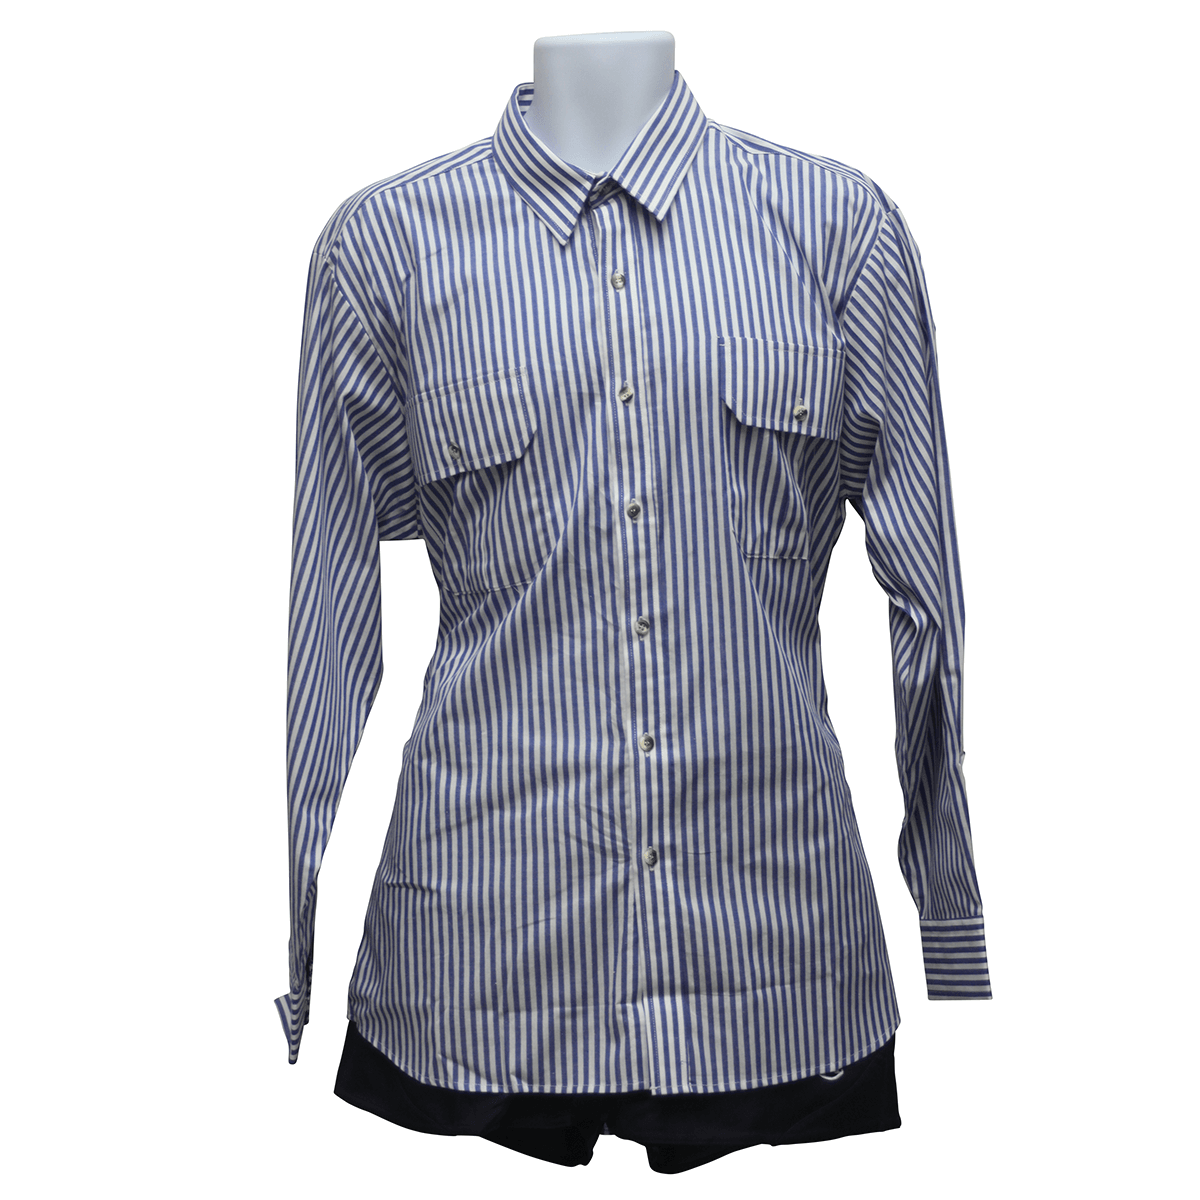 Calrossy Dress Shirt Male | Calrossy Anglican School | Noone